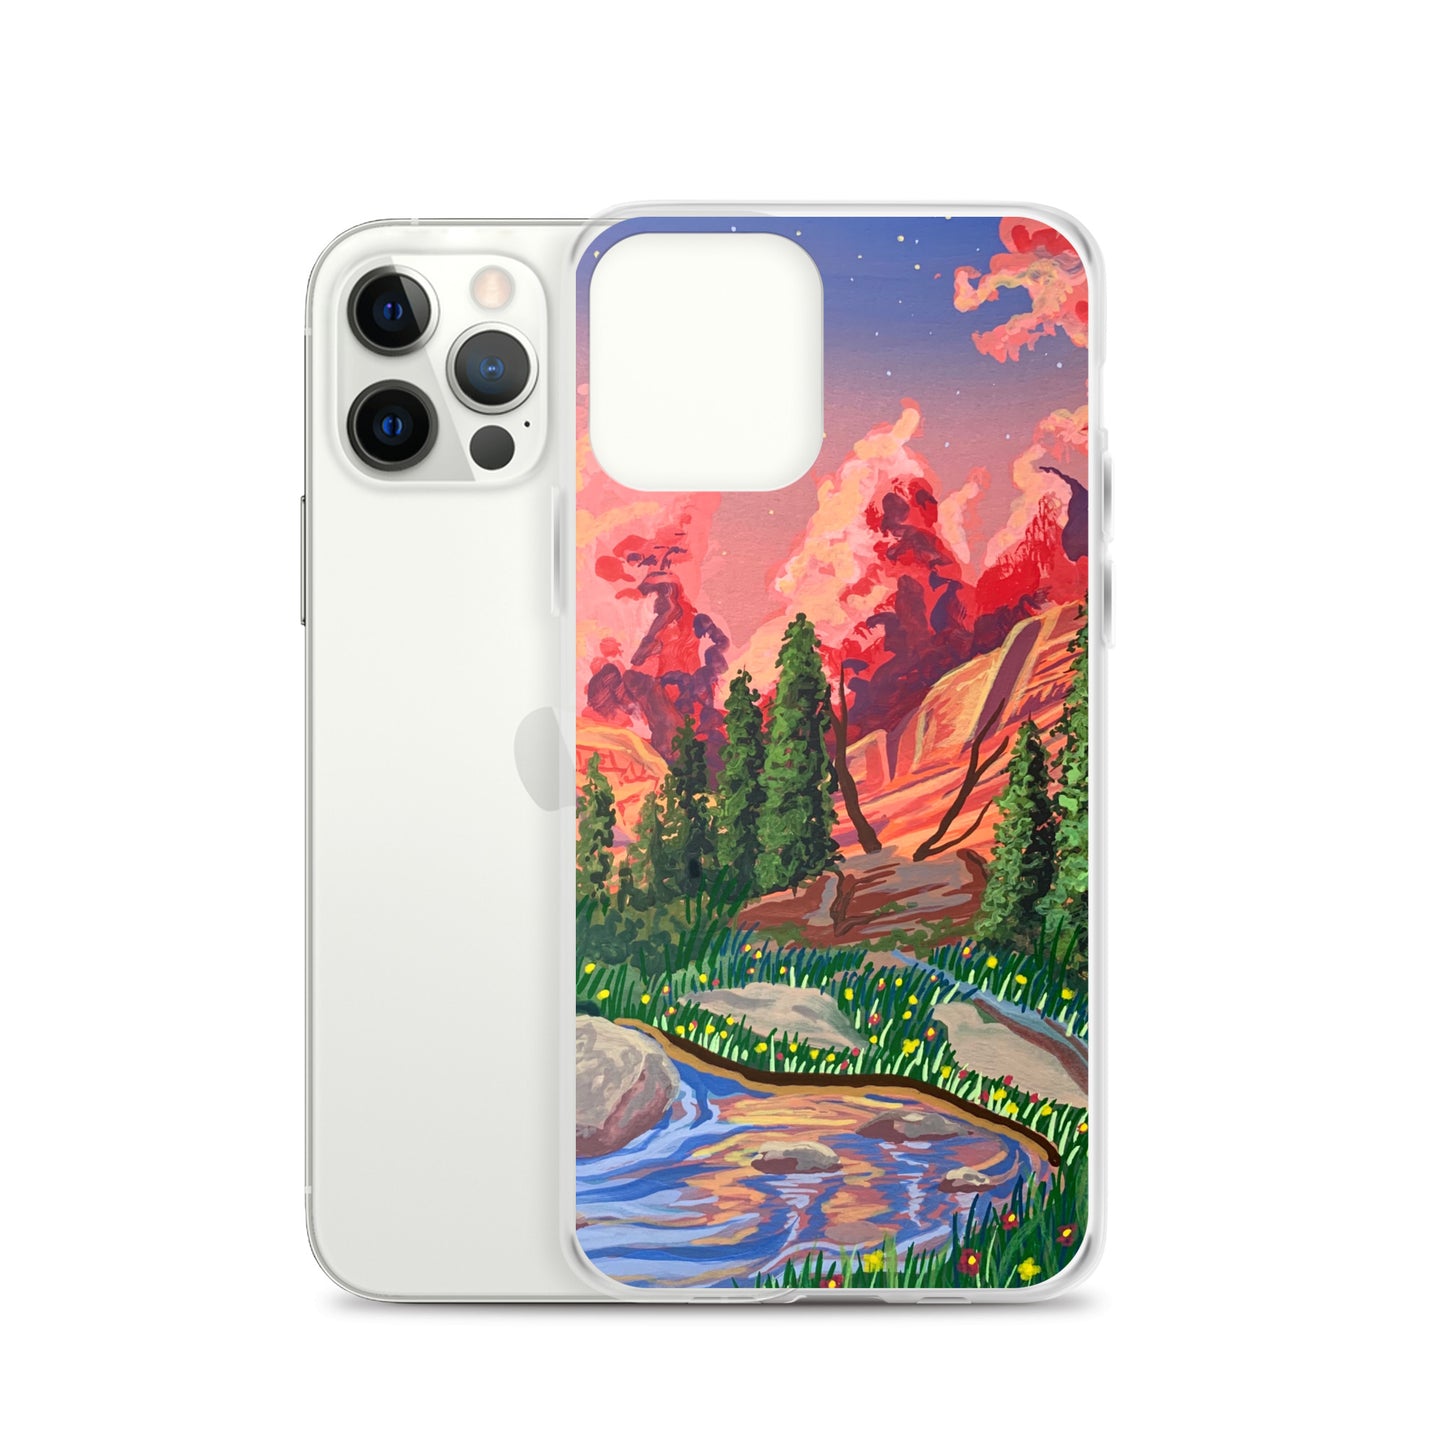 Rocky Mountain National Park iPhone Case